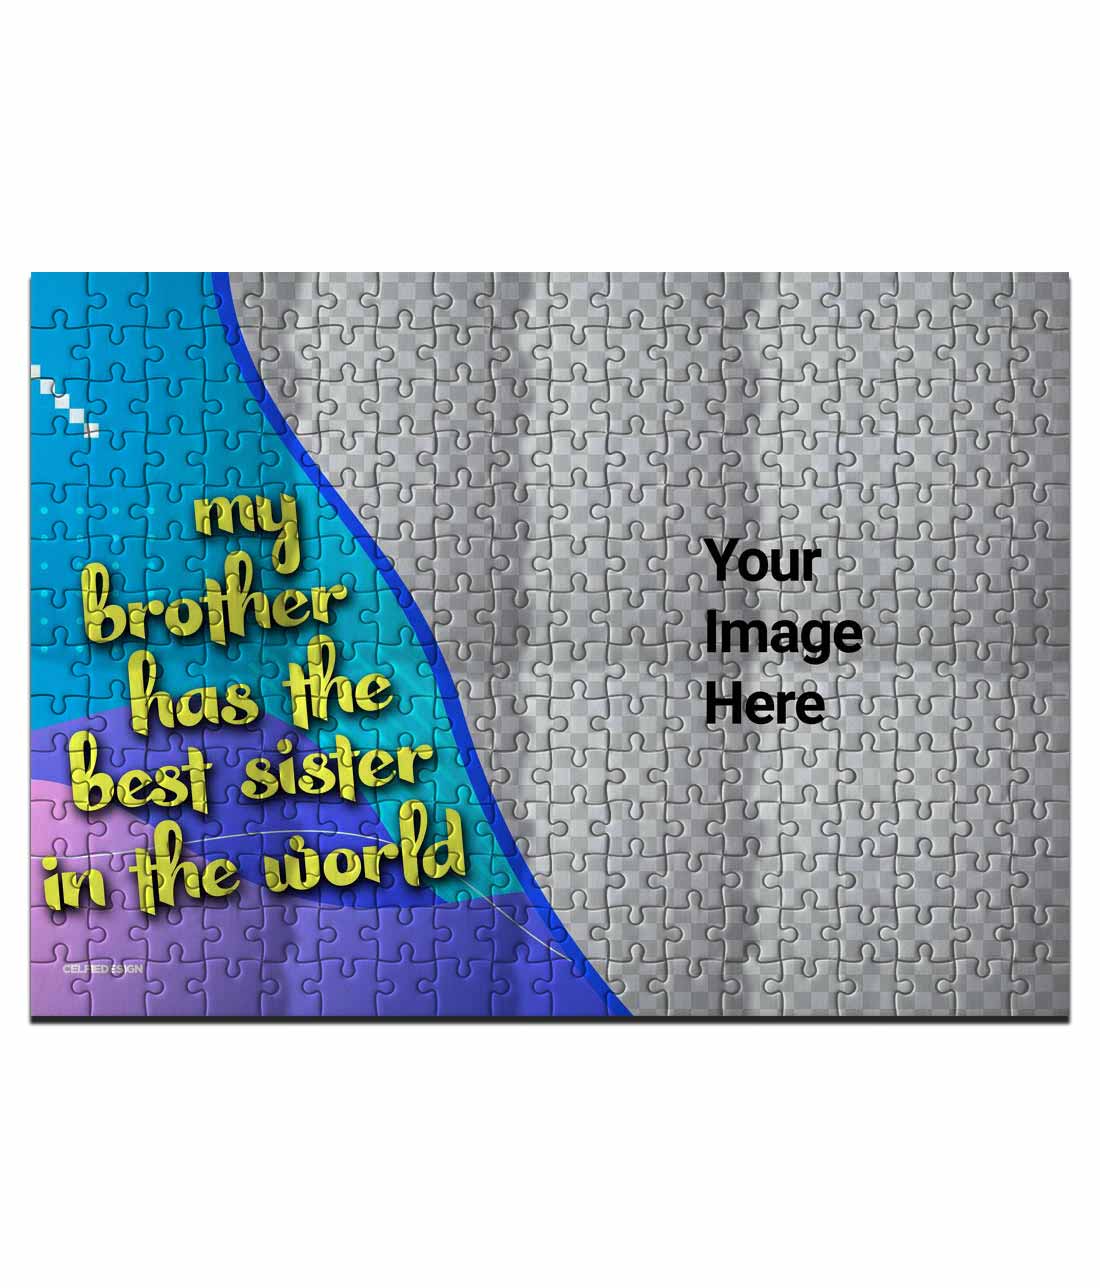 Buy Best Sister - Magnetic Puzzles Puzzles Online